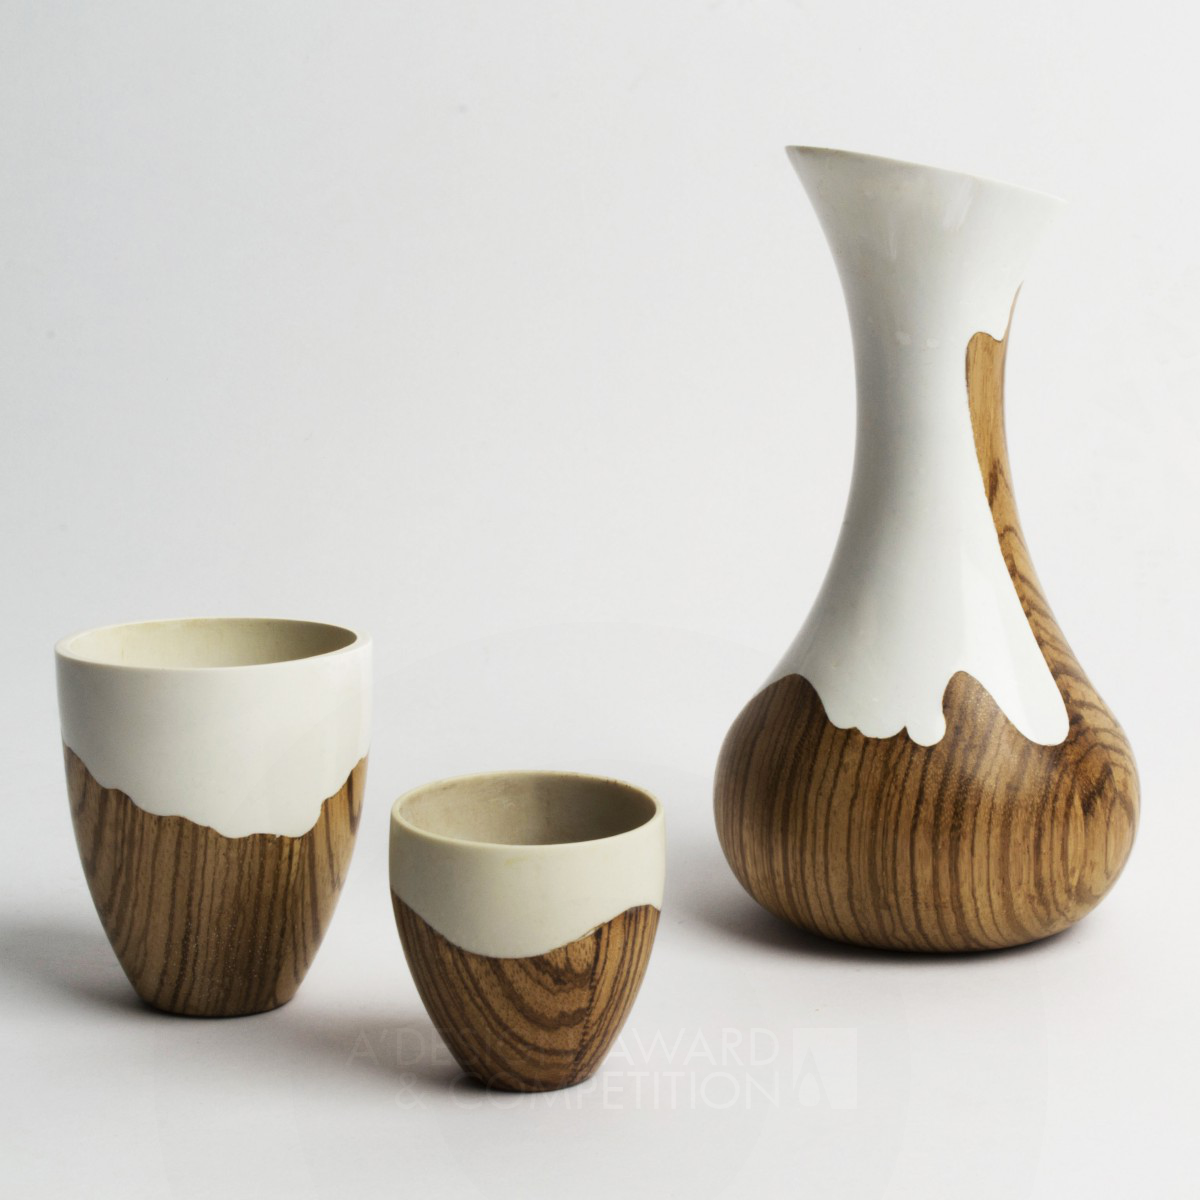 Contra Vessels: Bringing the Outdoors Indoors